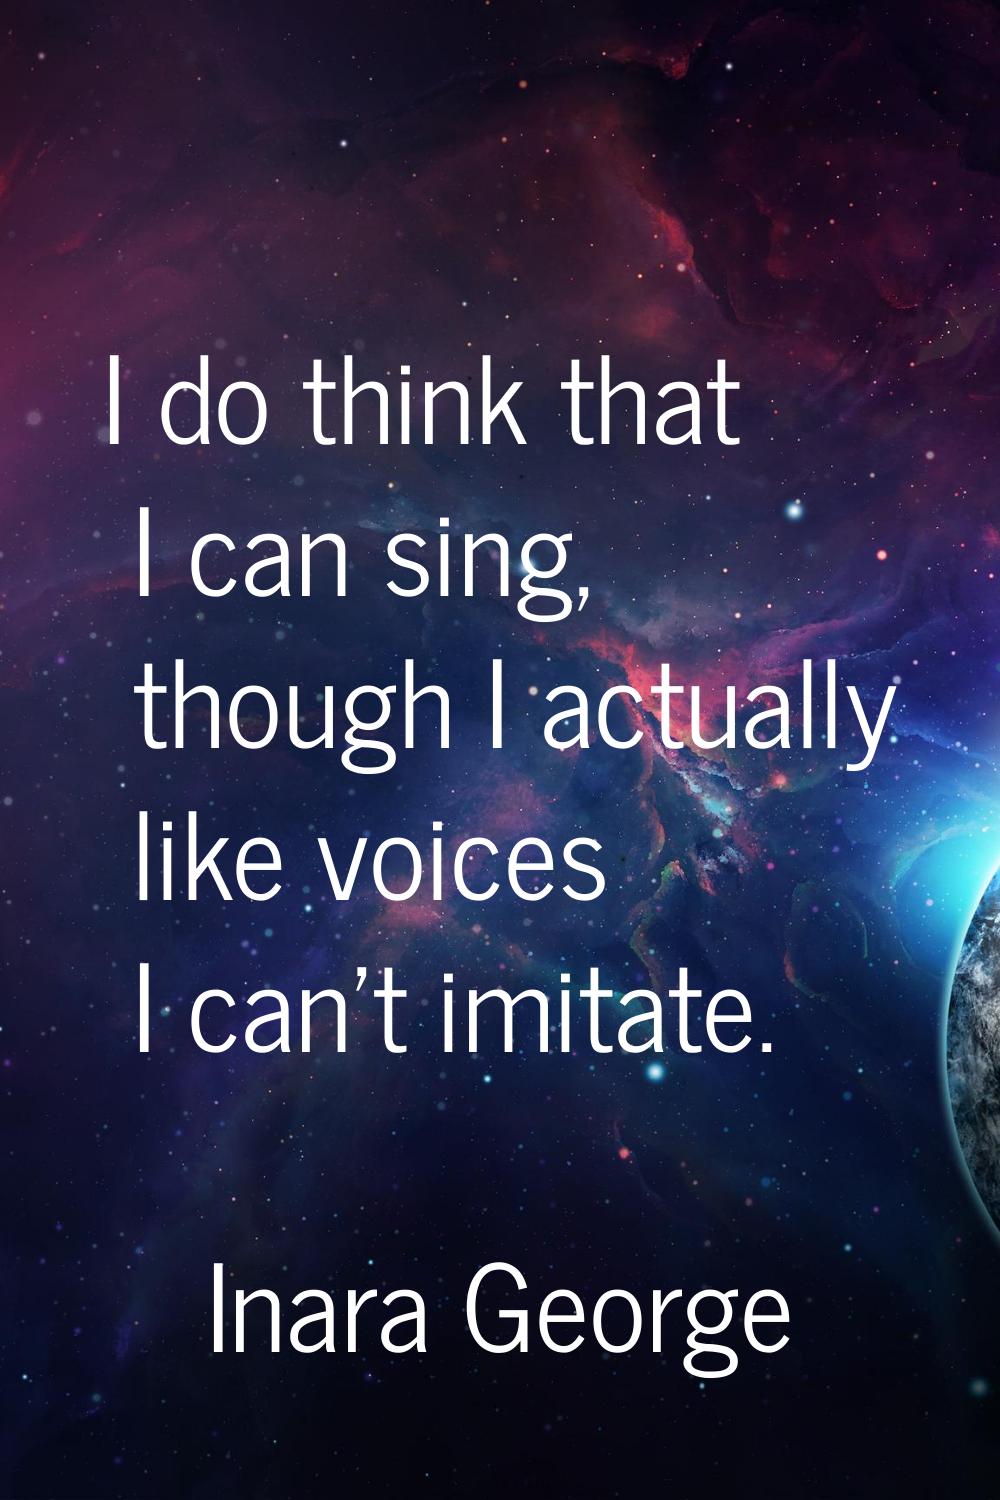 I do think that I can sing, though I actually like voices I can't imitate.